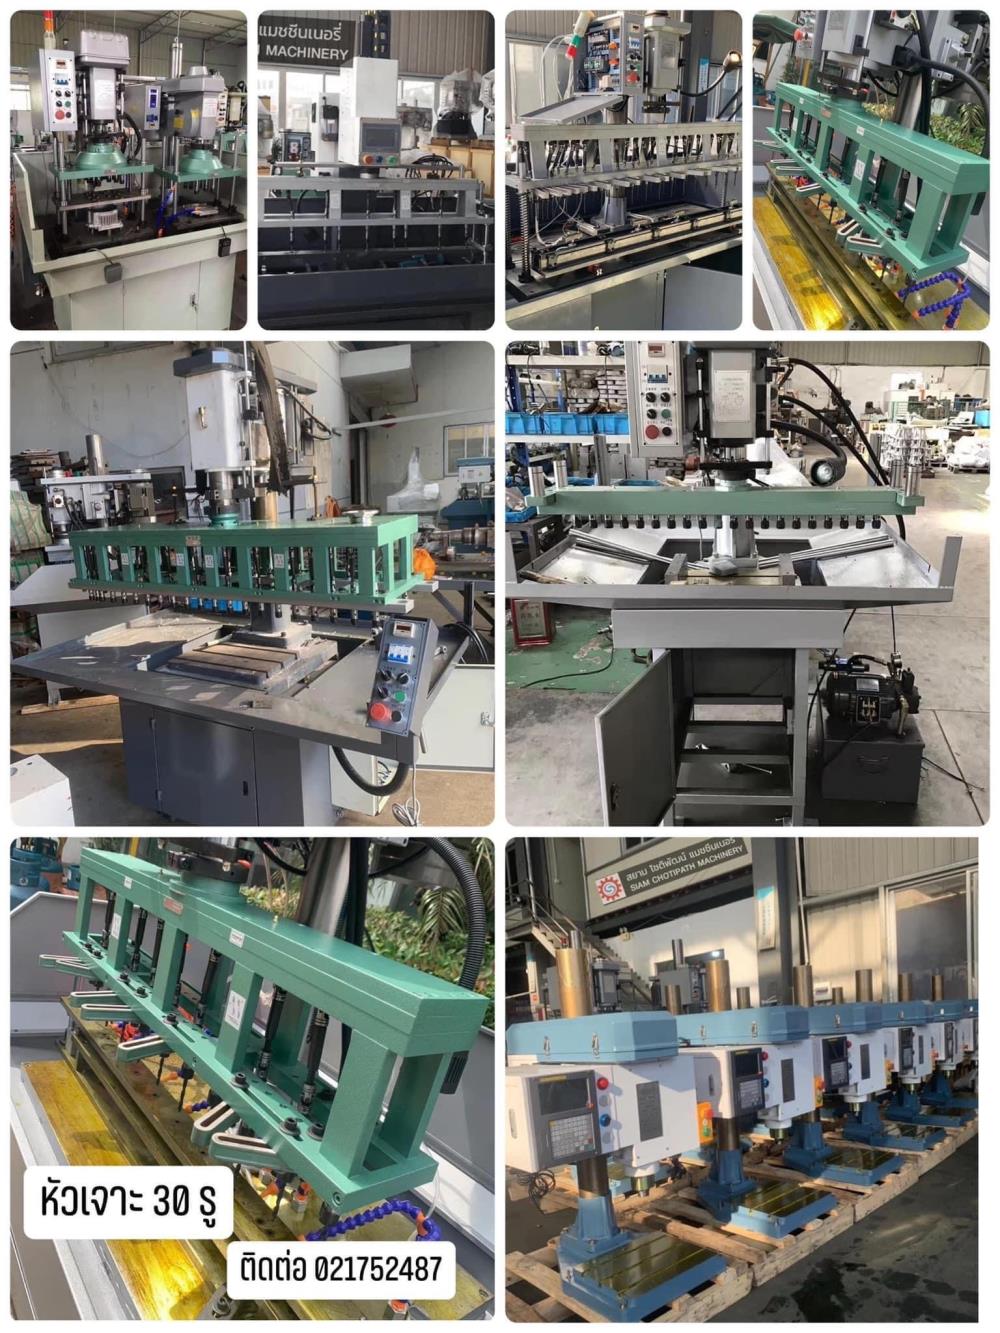 Drilling & Tapping Machine 